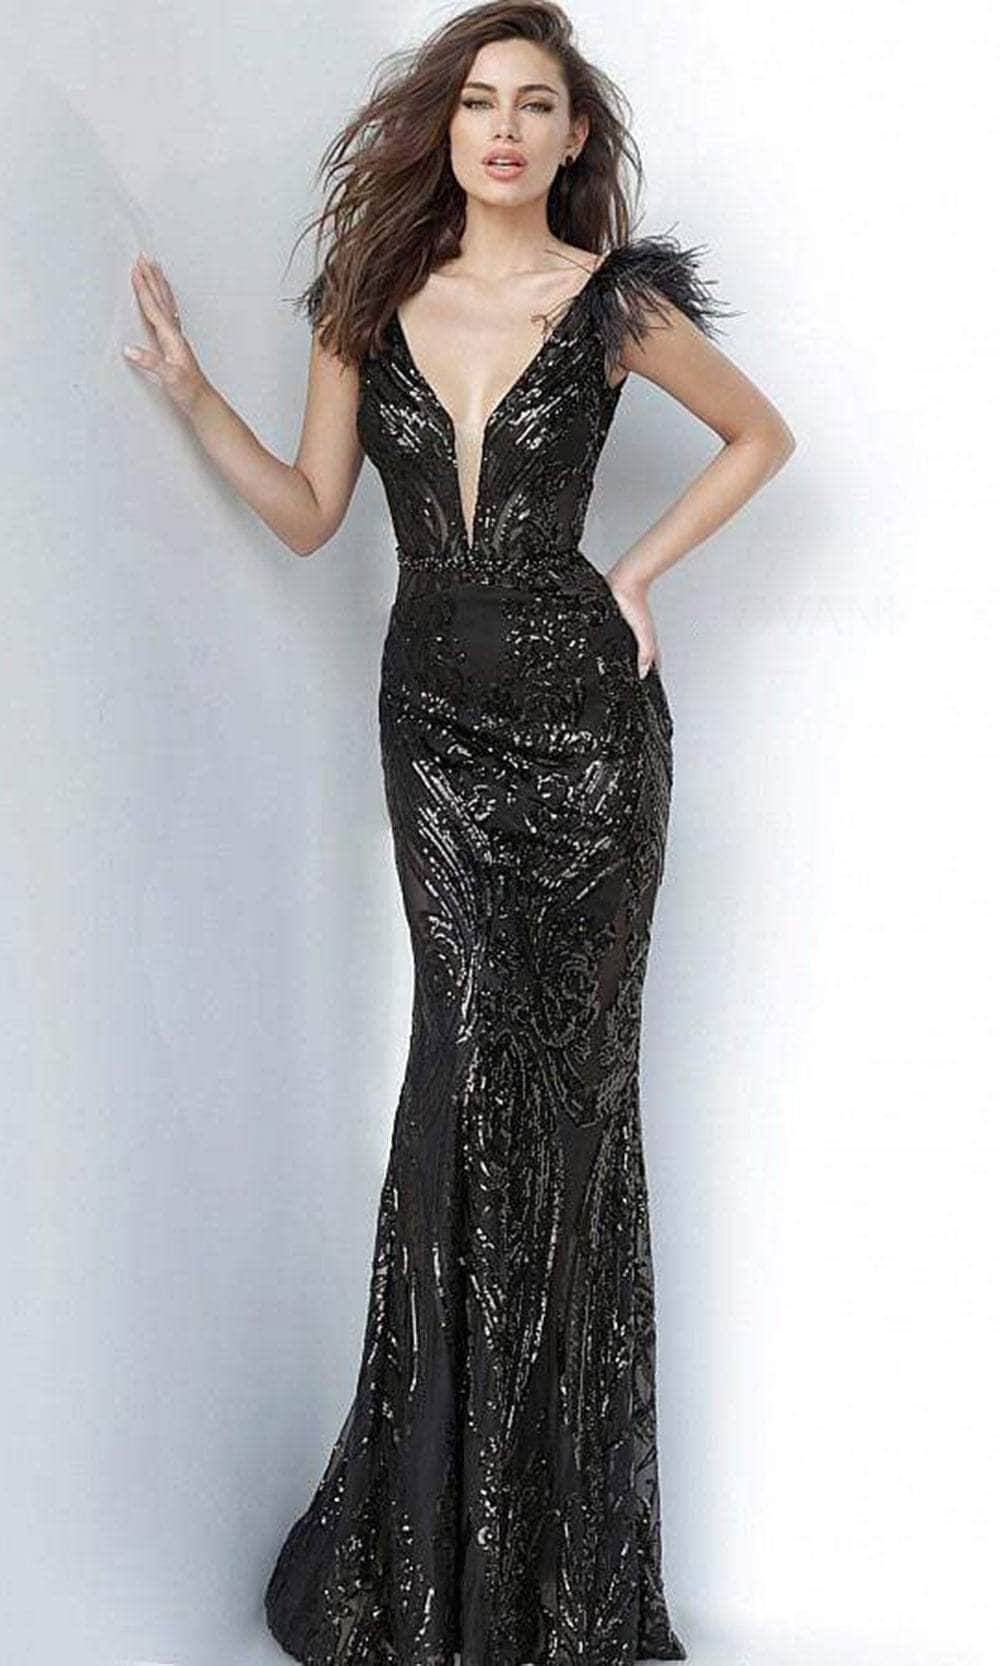 Image of Jovani - 3180 Feathered Cap Sleeve Patterned Sequin Gown